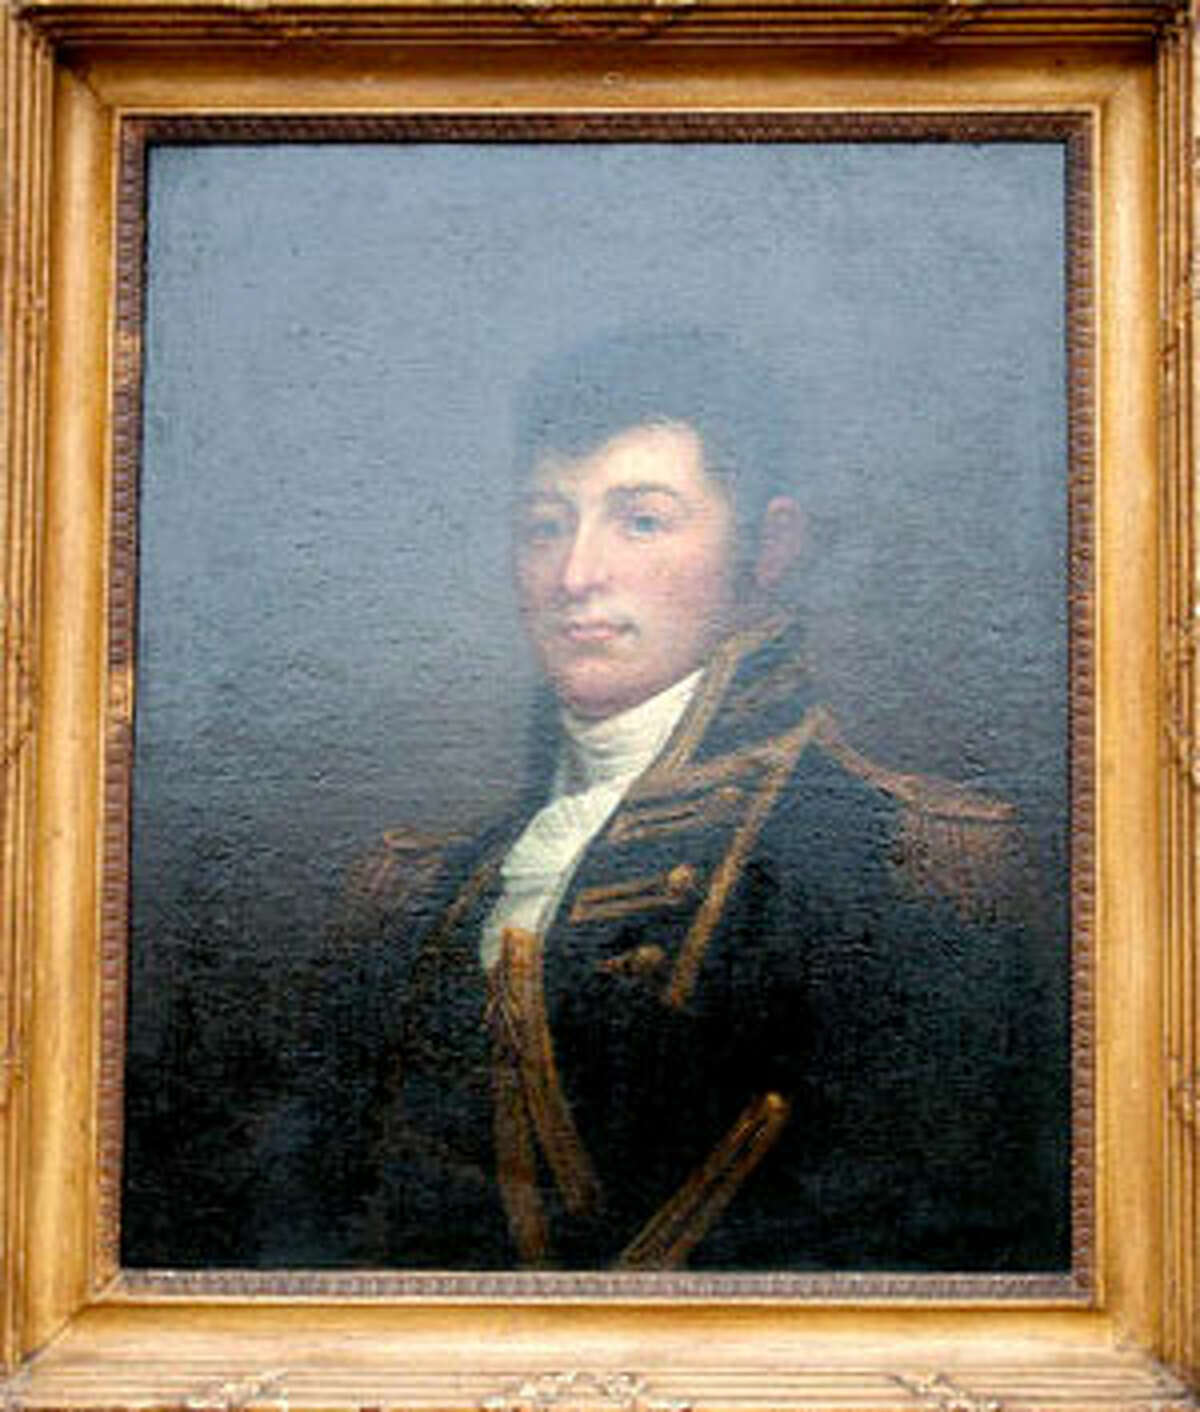 The portrait of Commodore Isaac Hull.